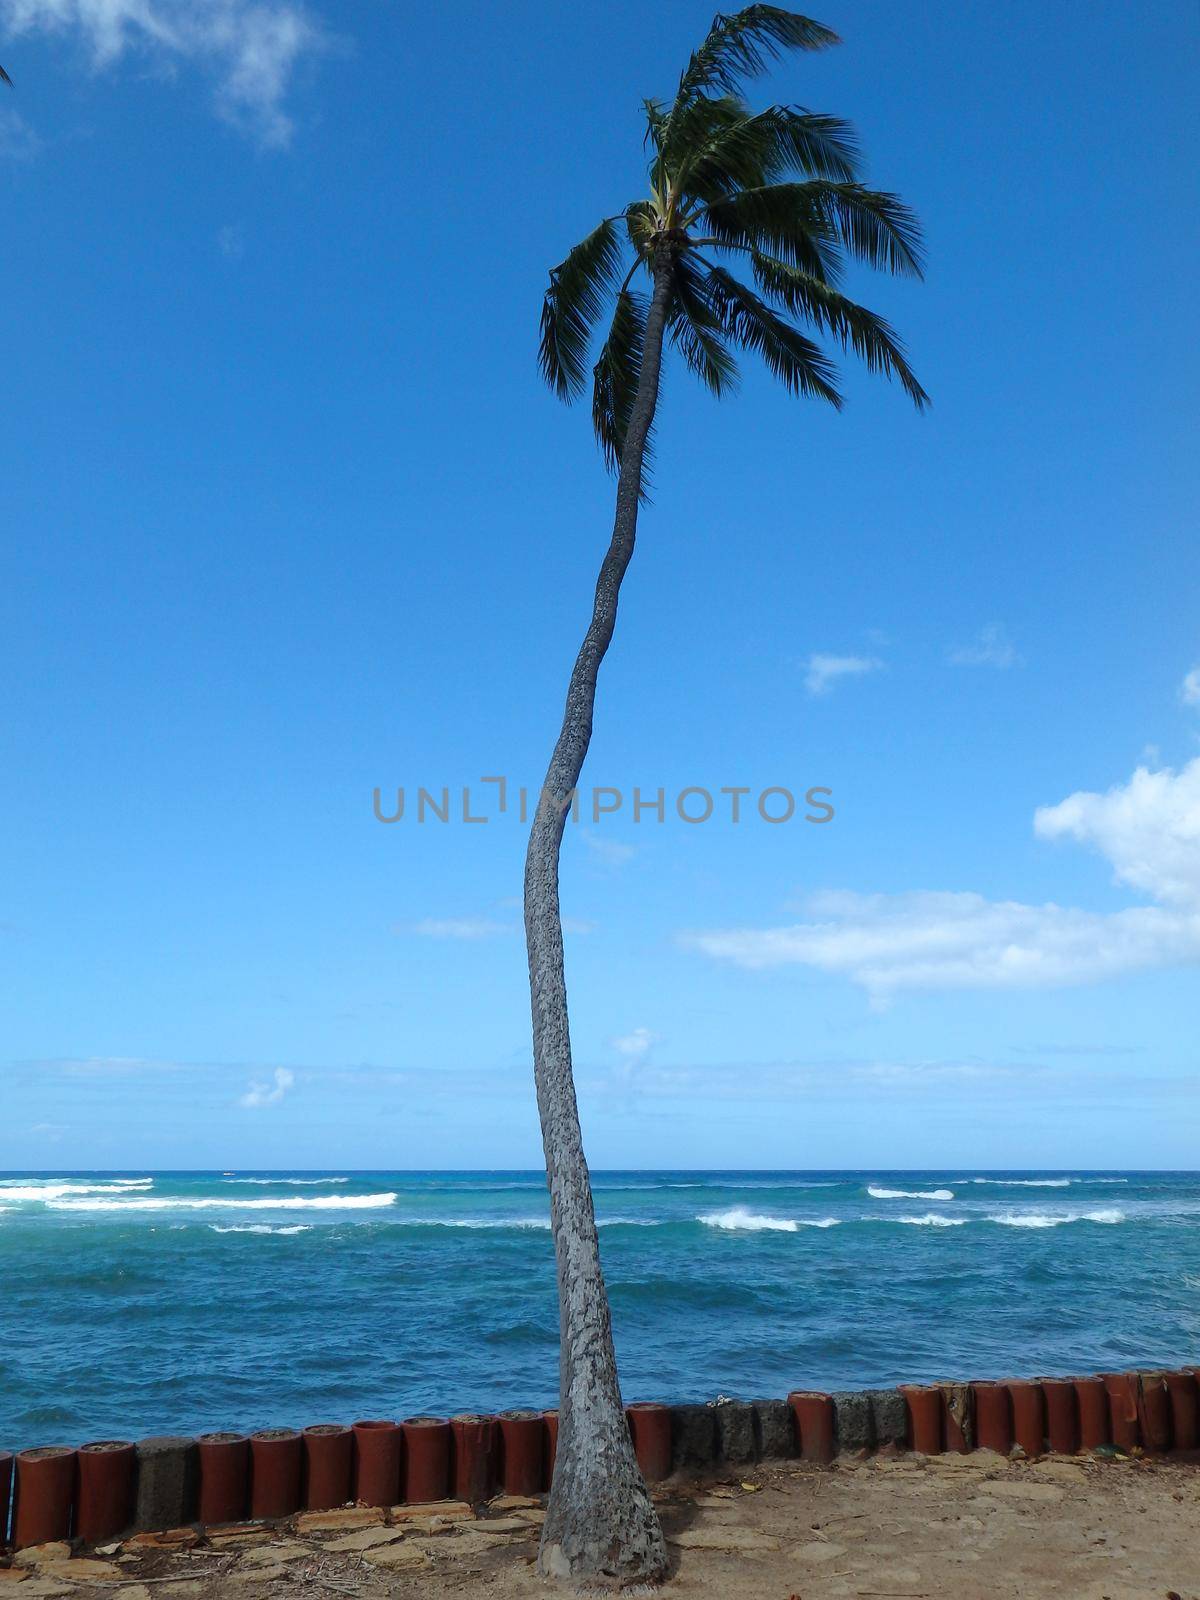 Coconut tree hang over stone wall with waves in shallow ocean waters of Waikiki by EricGBVD